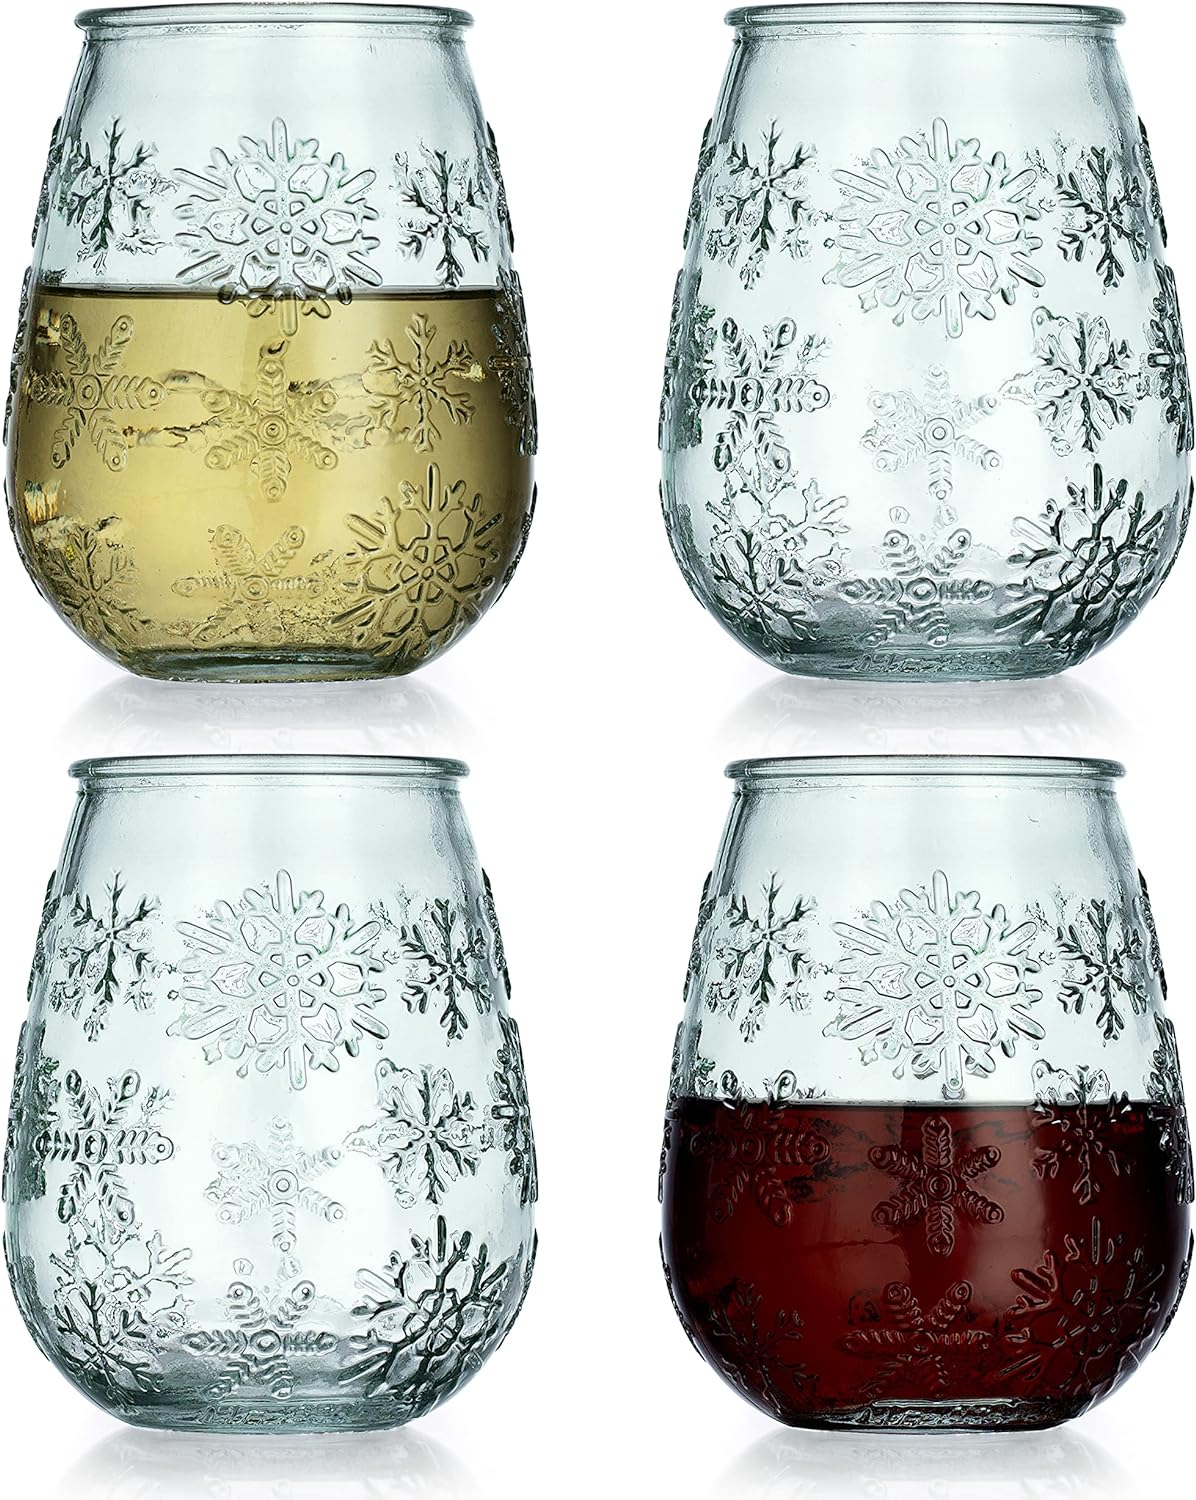 Snowflake Christmas Stemless Drink Glasses For Red Or White Wine